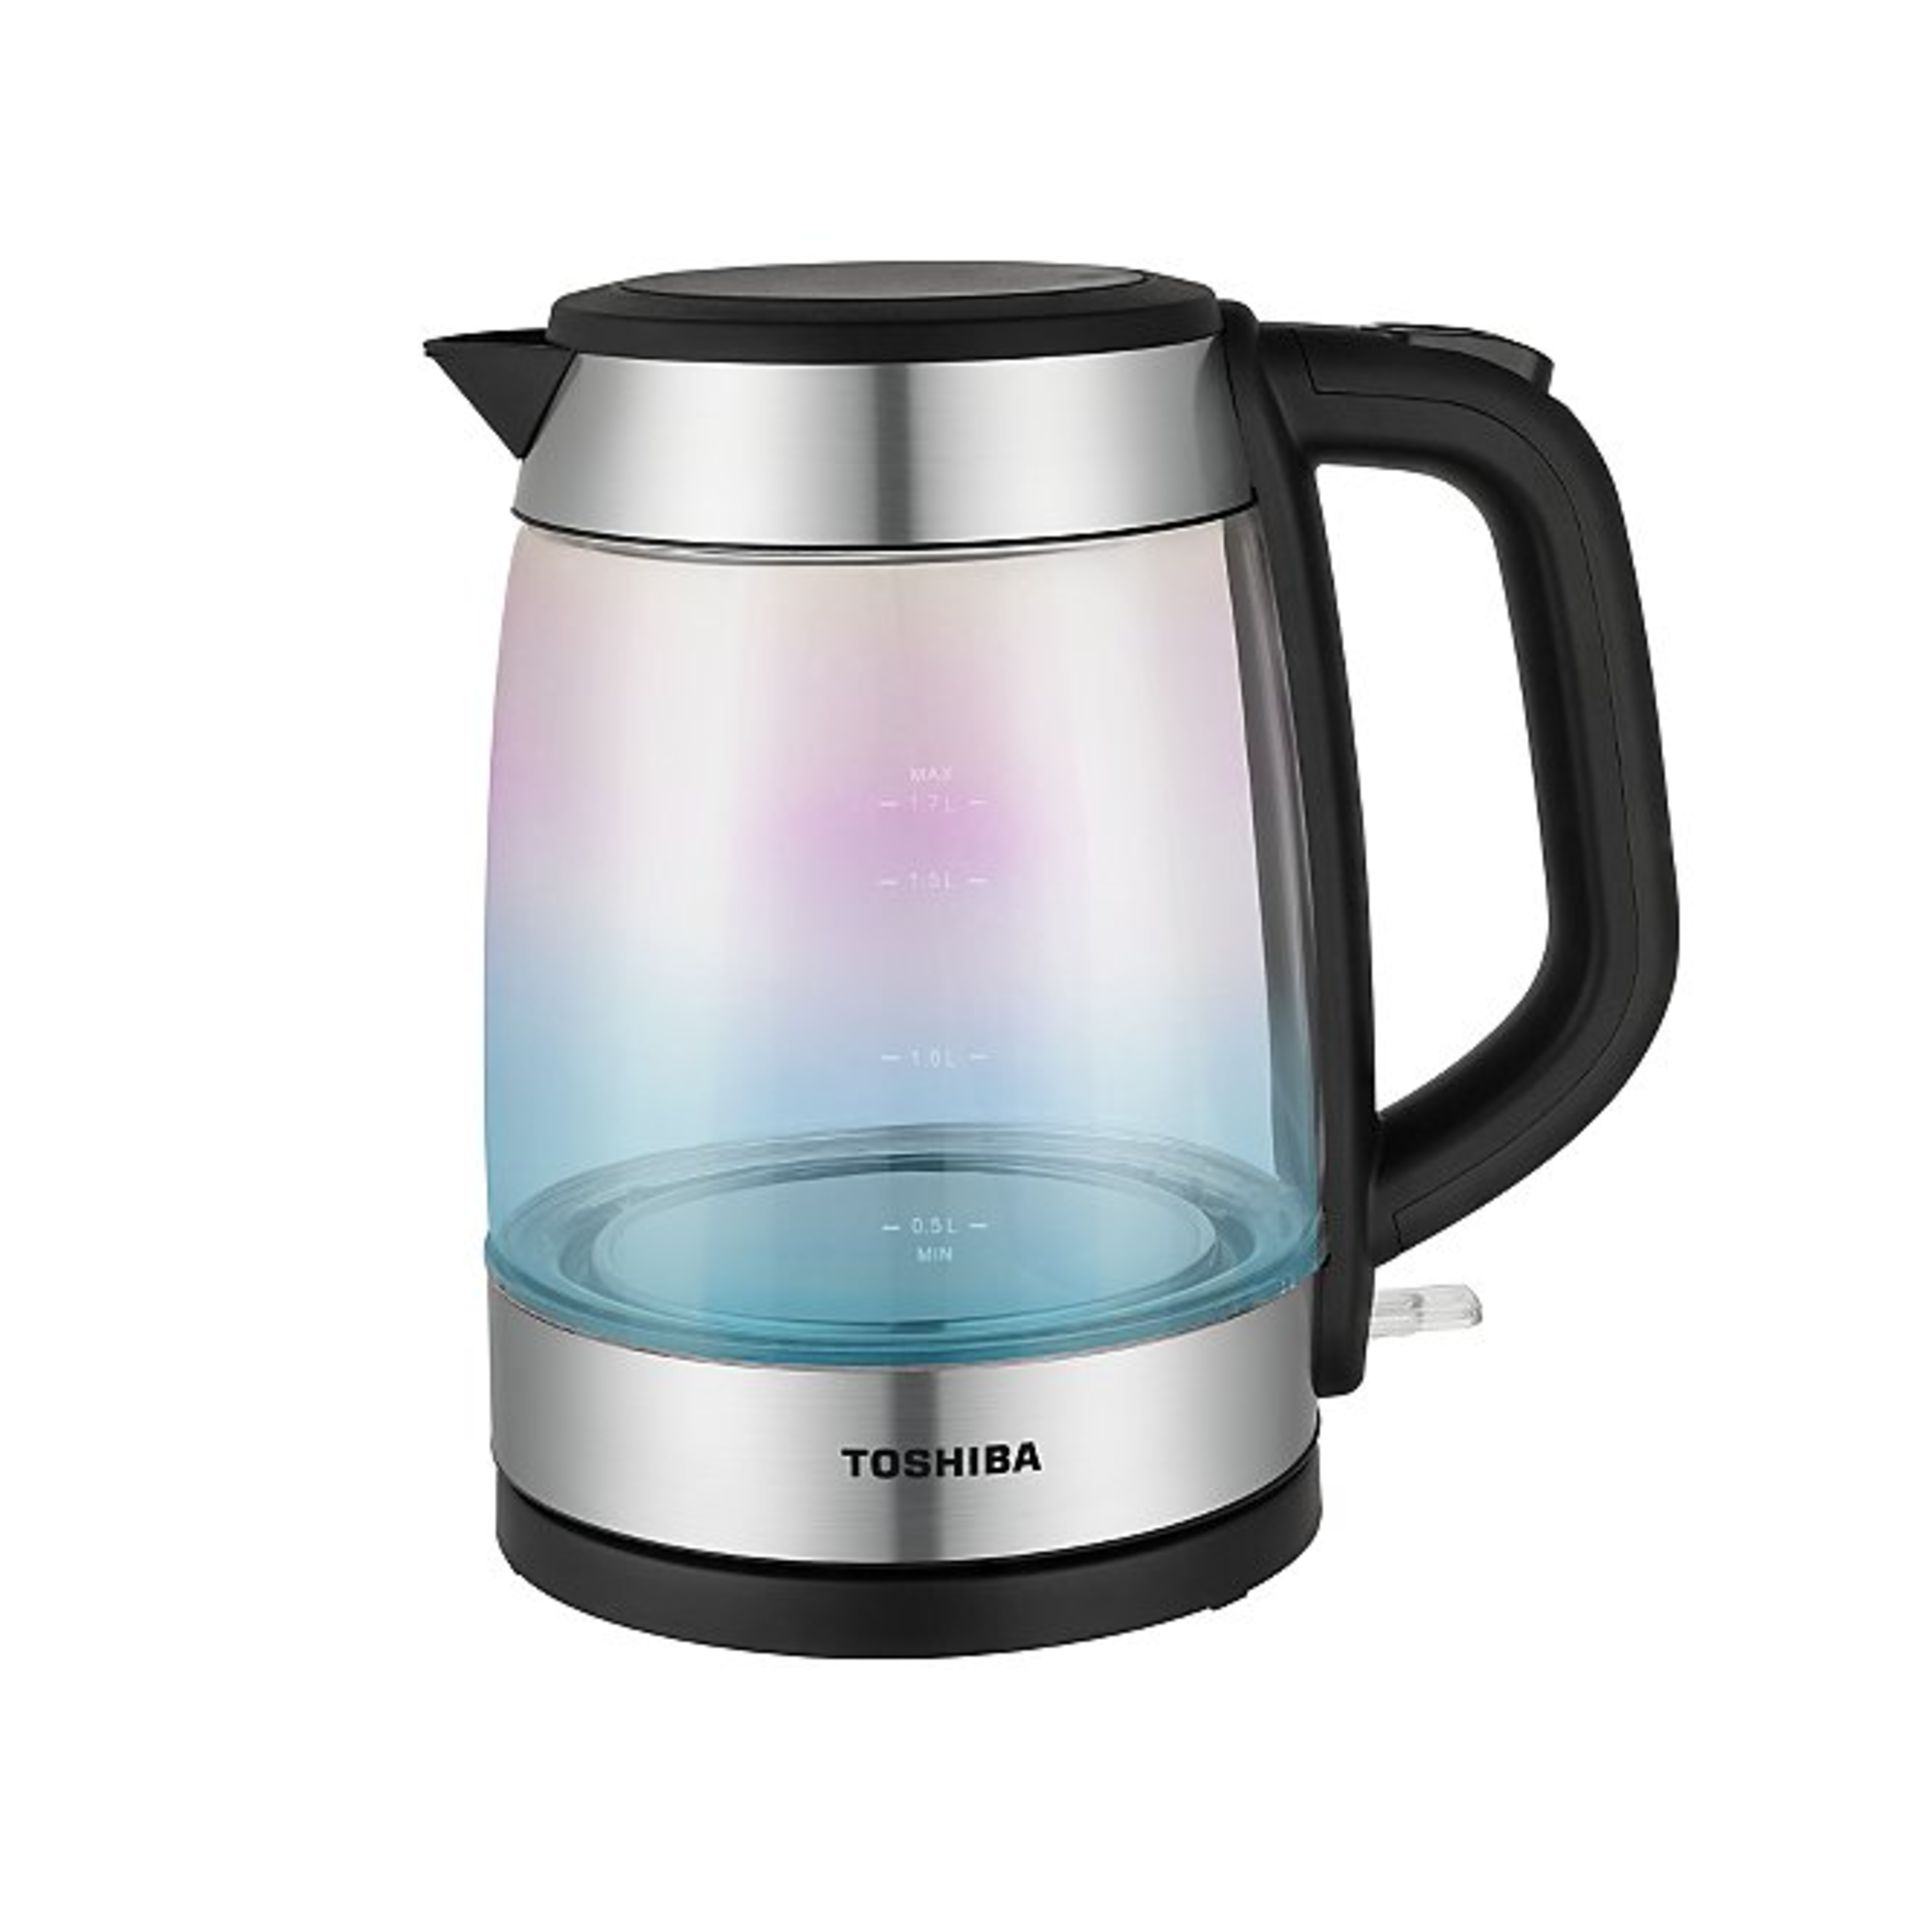 (15) 4x Items, 1x Toshiba Rapid Boiling Electric Kettle Cream. 1x Toshiba Rapid Boiling Electric Ke - Image 3 of 12